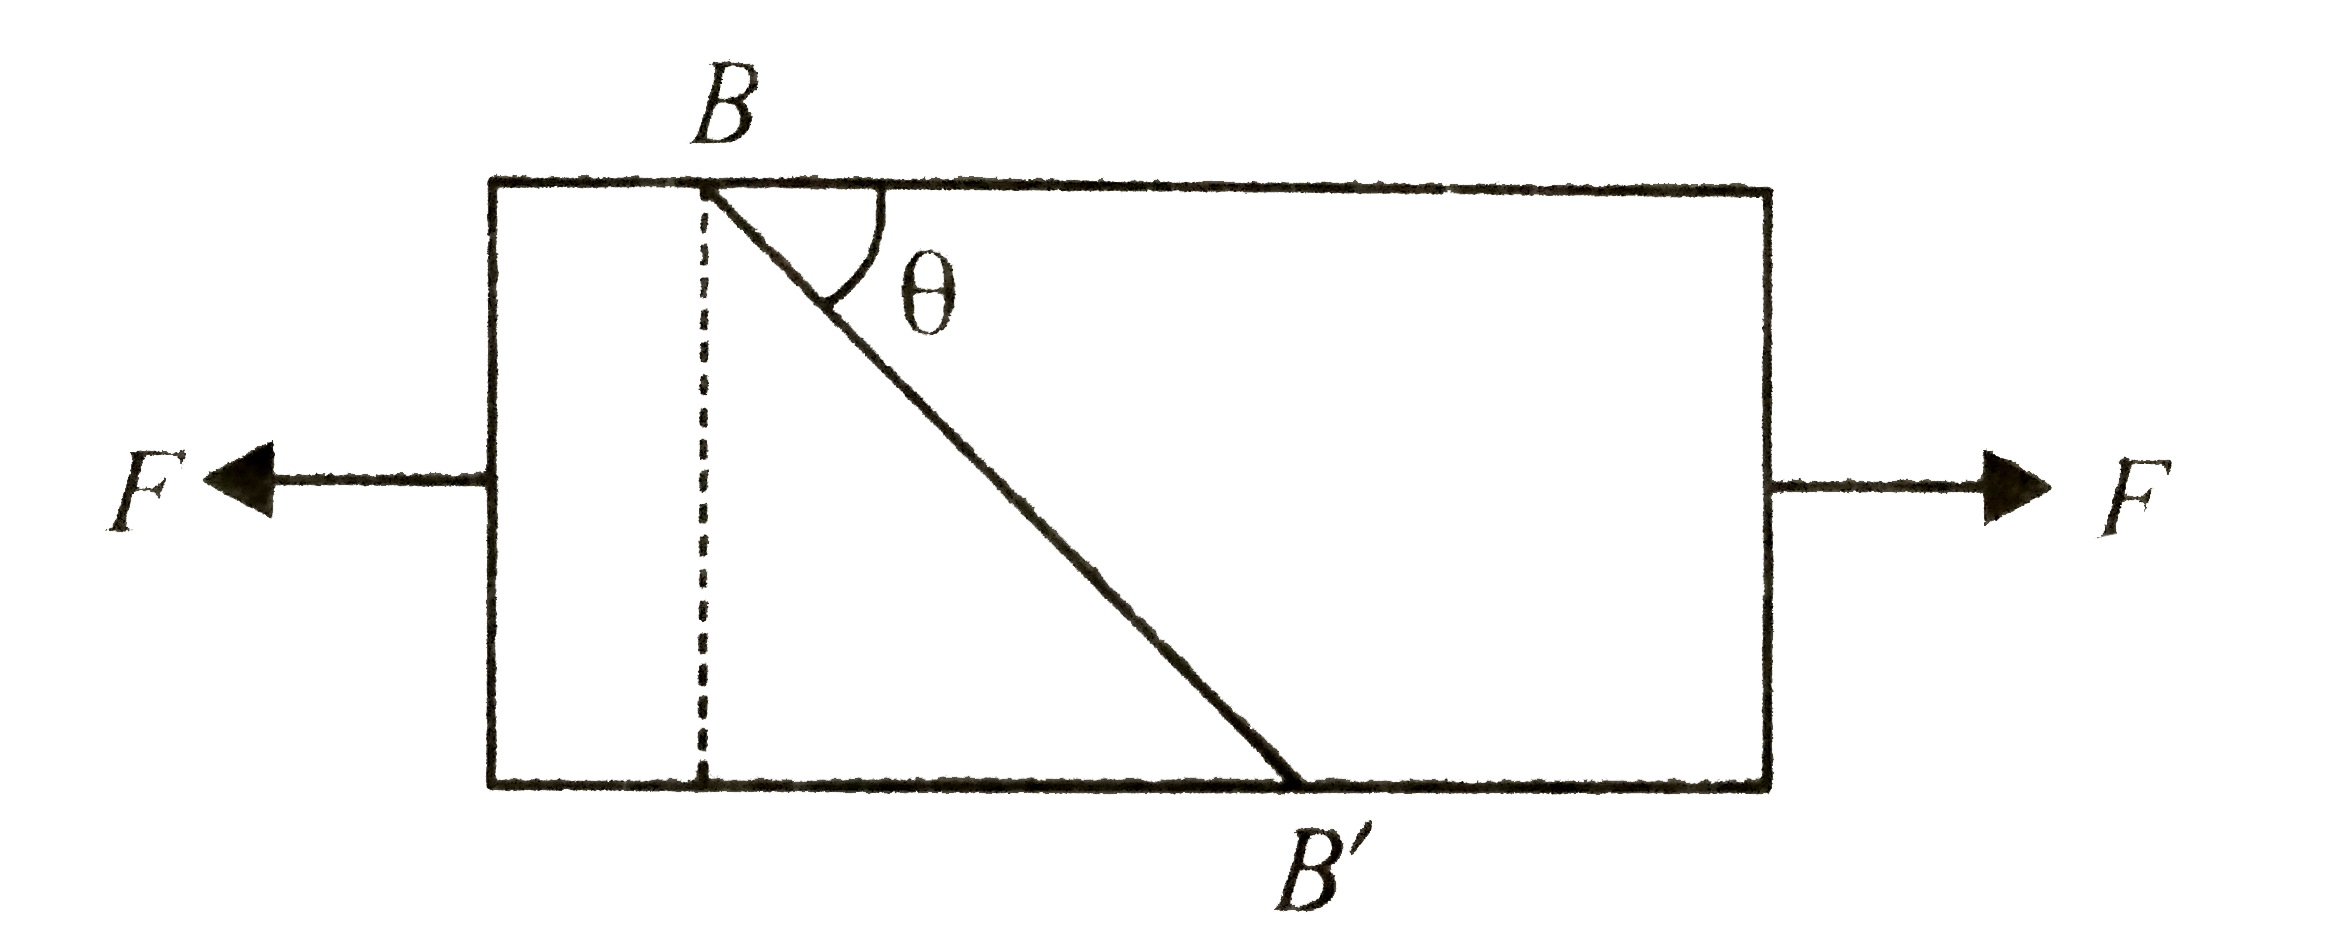 A bar of cross- sectional area A is is subjected two equal and opposite tensile forces at its ends as shown in figure.  Consider a plane BB' making an angle theta with length